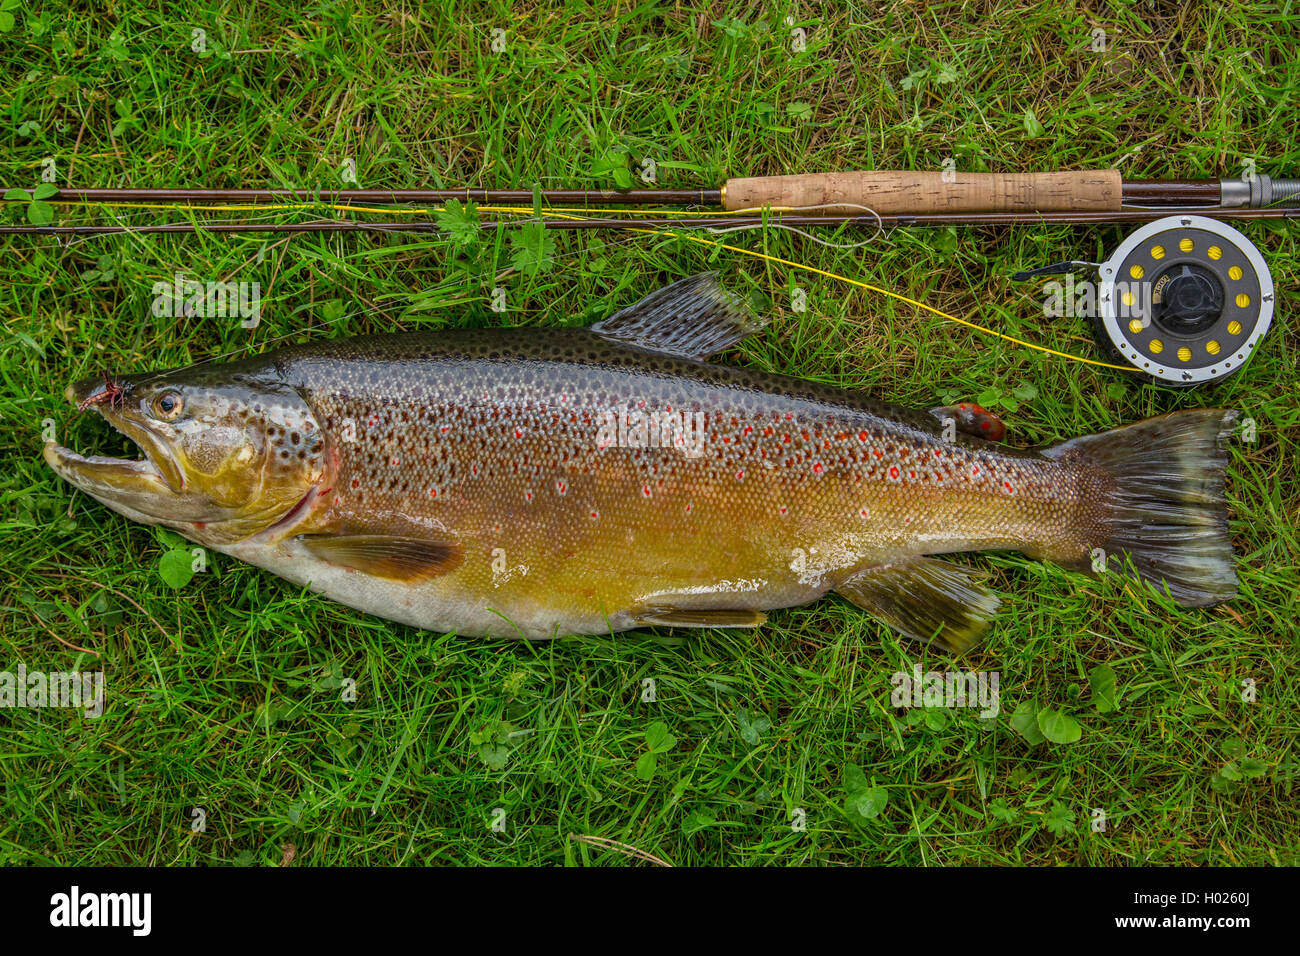 brown trout, river trout, brook trout (Salmo trutta fario), caught with a fly rod, Germany, Bavaria, Erdinger Moos Stock Photo